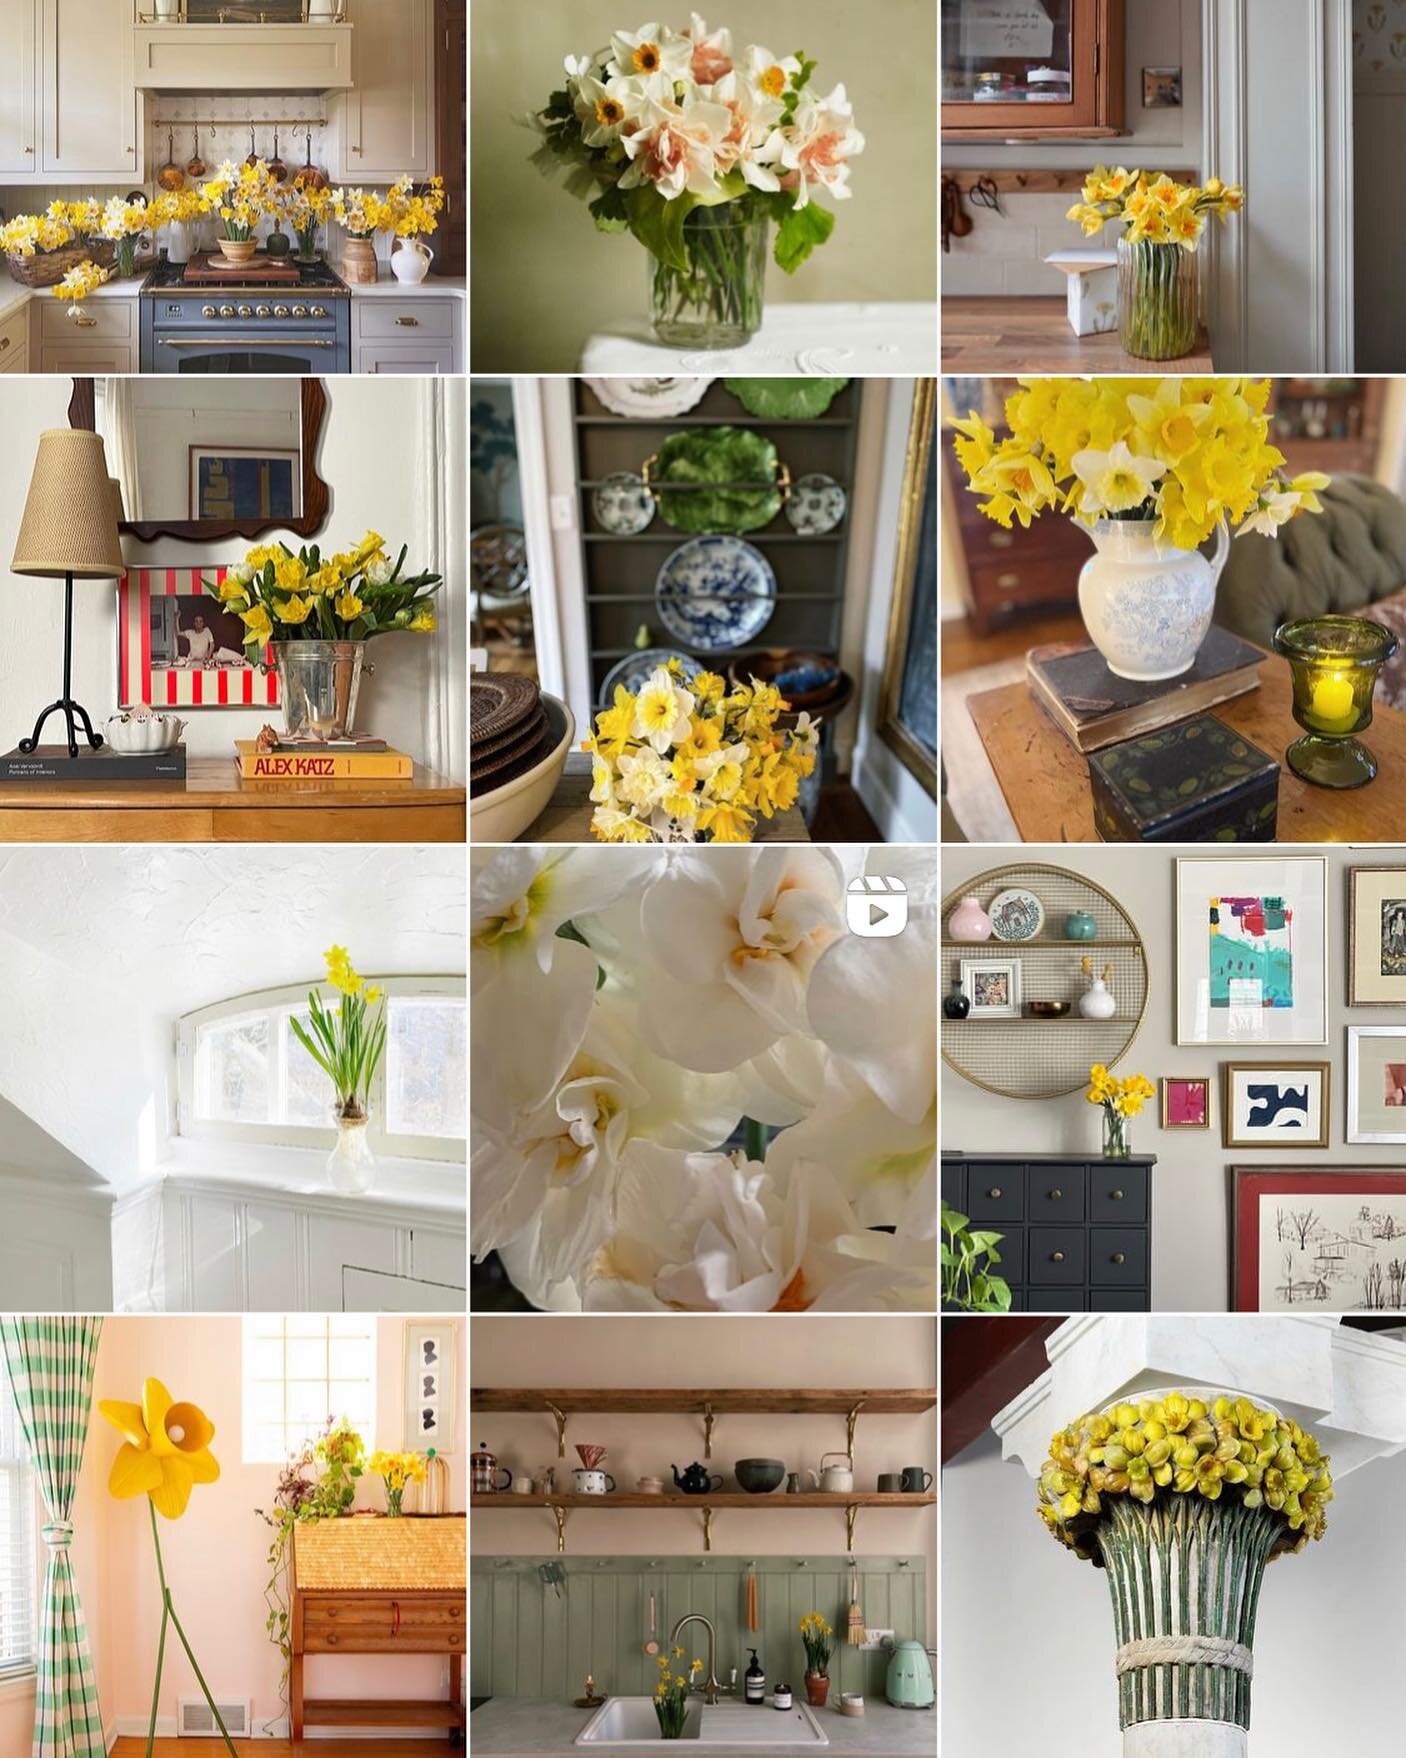 Happy #friendlyfriday friends this week I feel the pull of daffodils! Please follow this to the originators feed - show these creatives lots of L💛VE with a double tap and a follow! 
&bull;
Our week has been filled with taking care of our sweet cat p